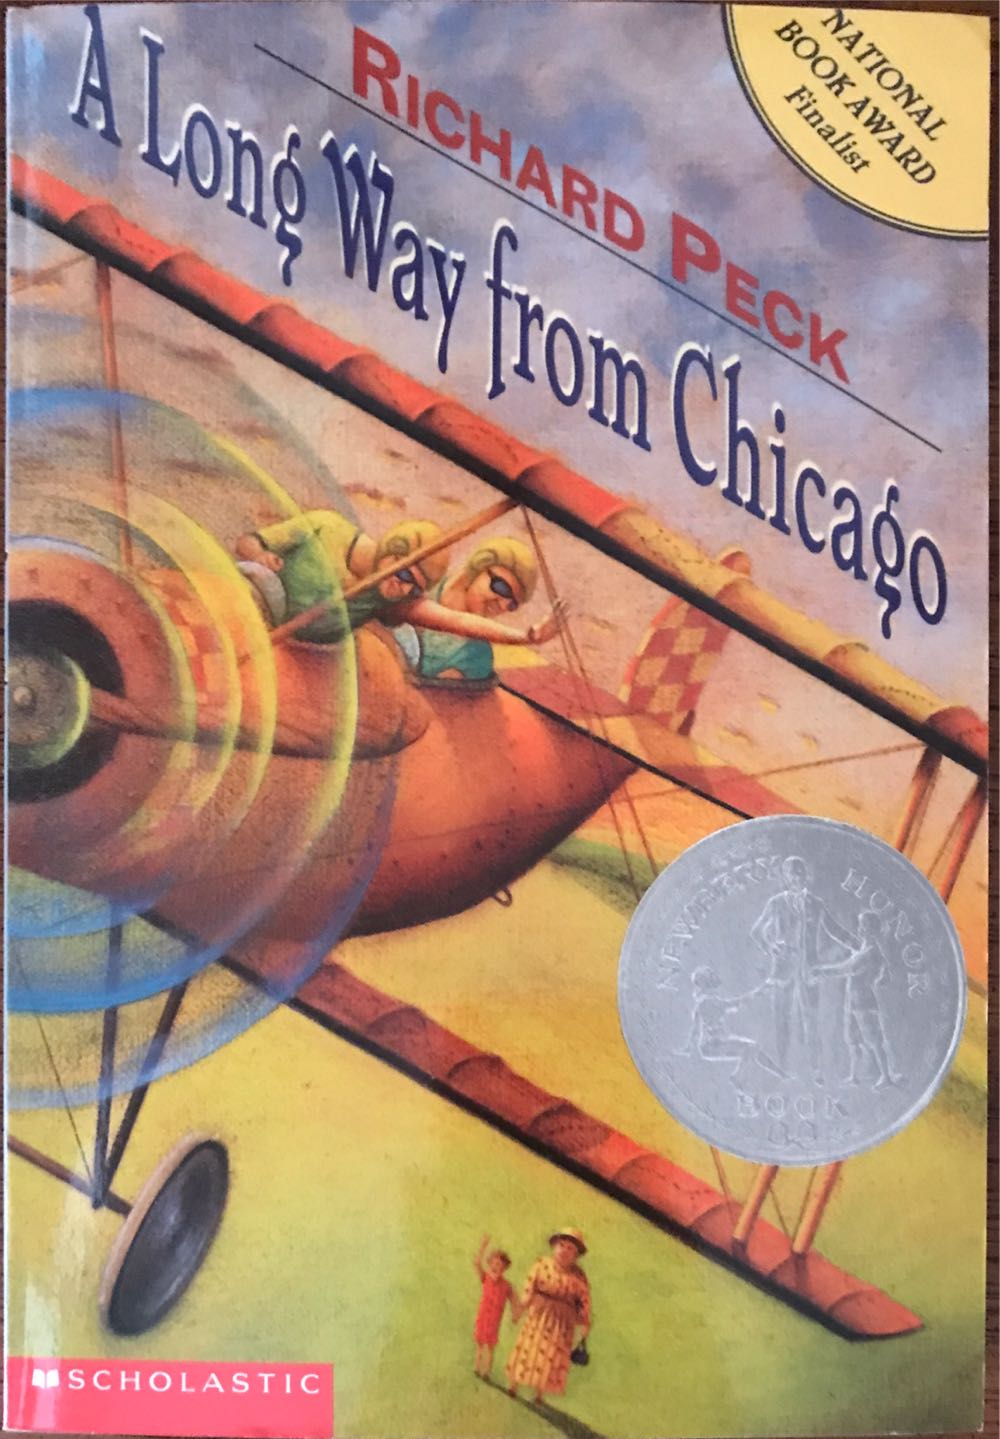 A Long Way From Chicago - Richard Peck (Scholastic Inc. - Paperback) book collectible [Barcode 9780439240925] - Main Image 3